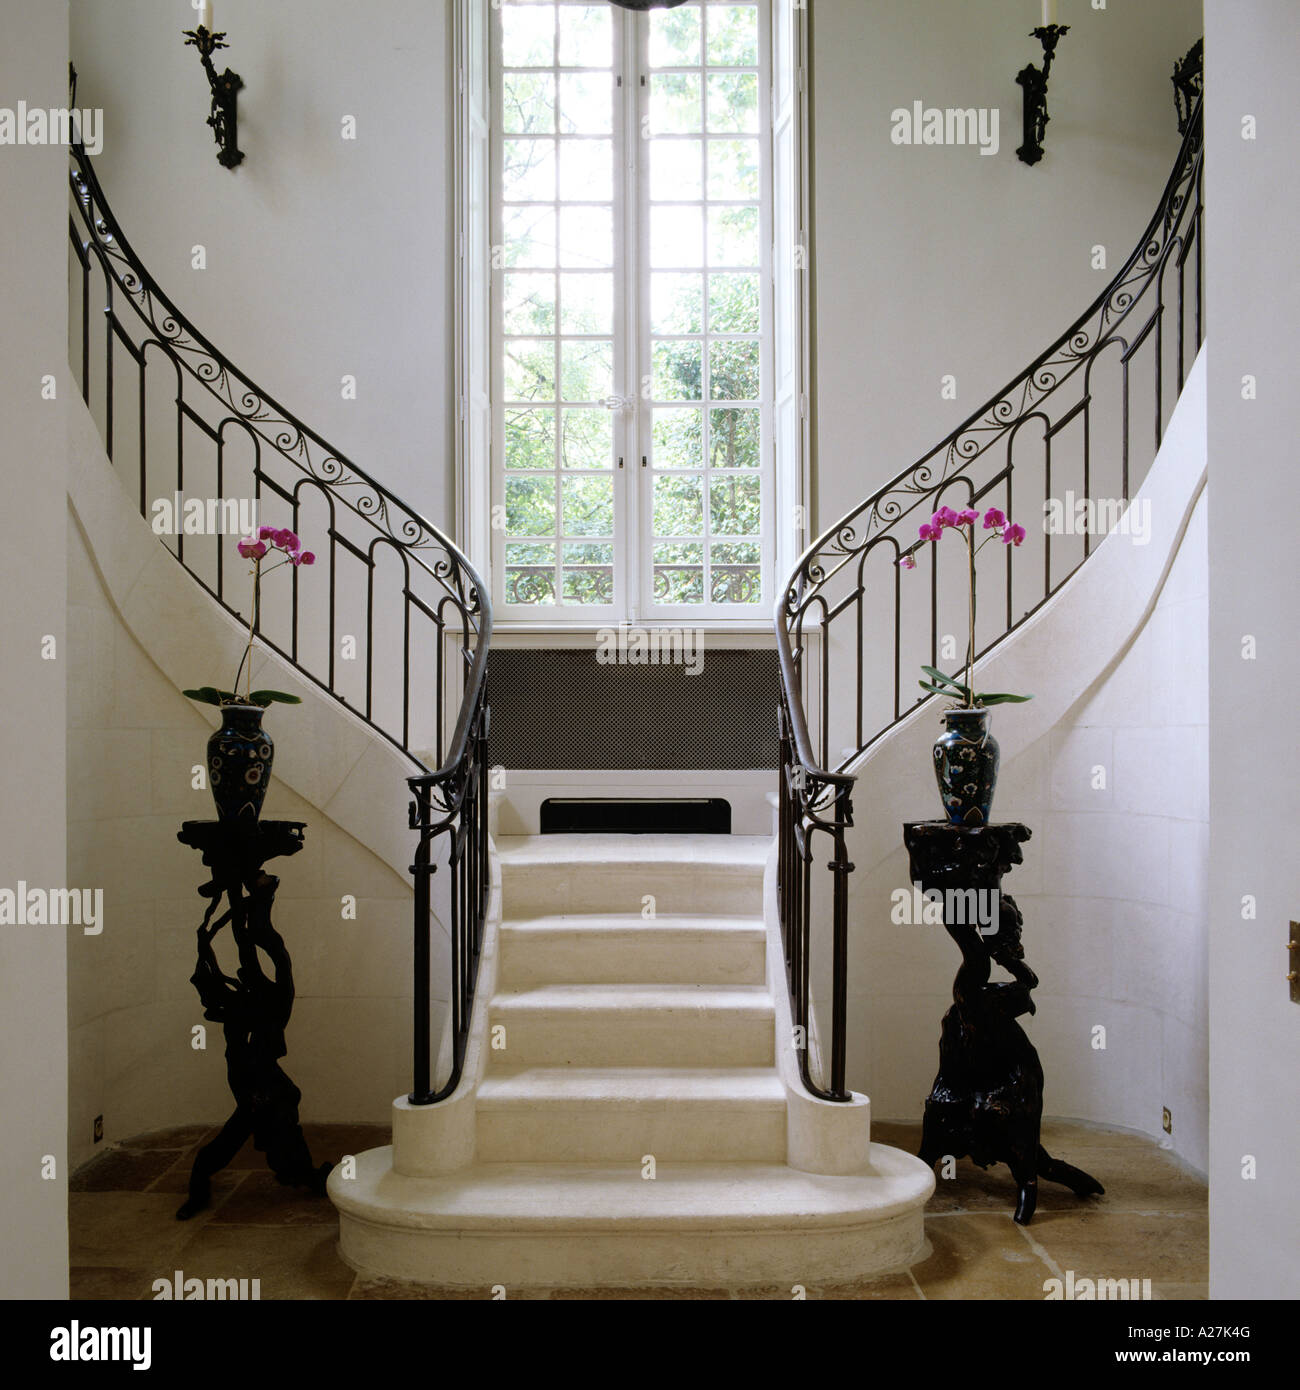 Stone grand staircase with wrought iron banister and large paned window Stock Photo